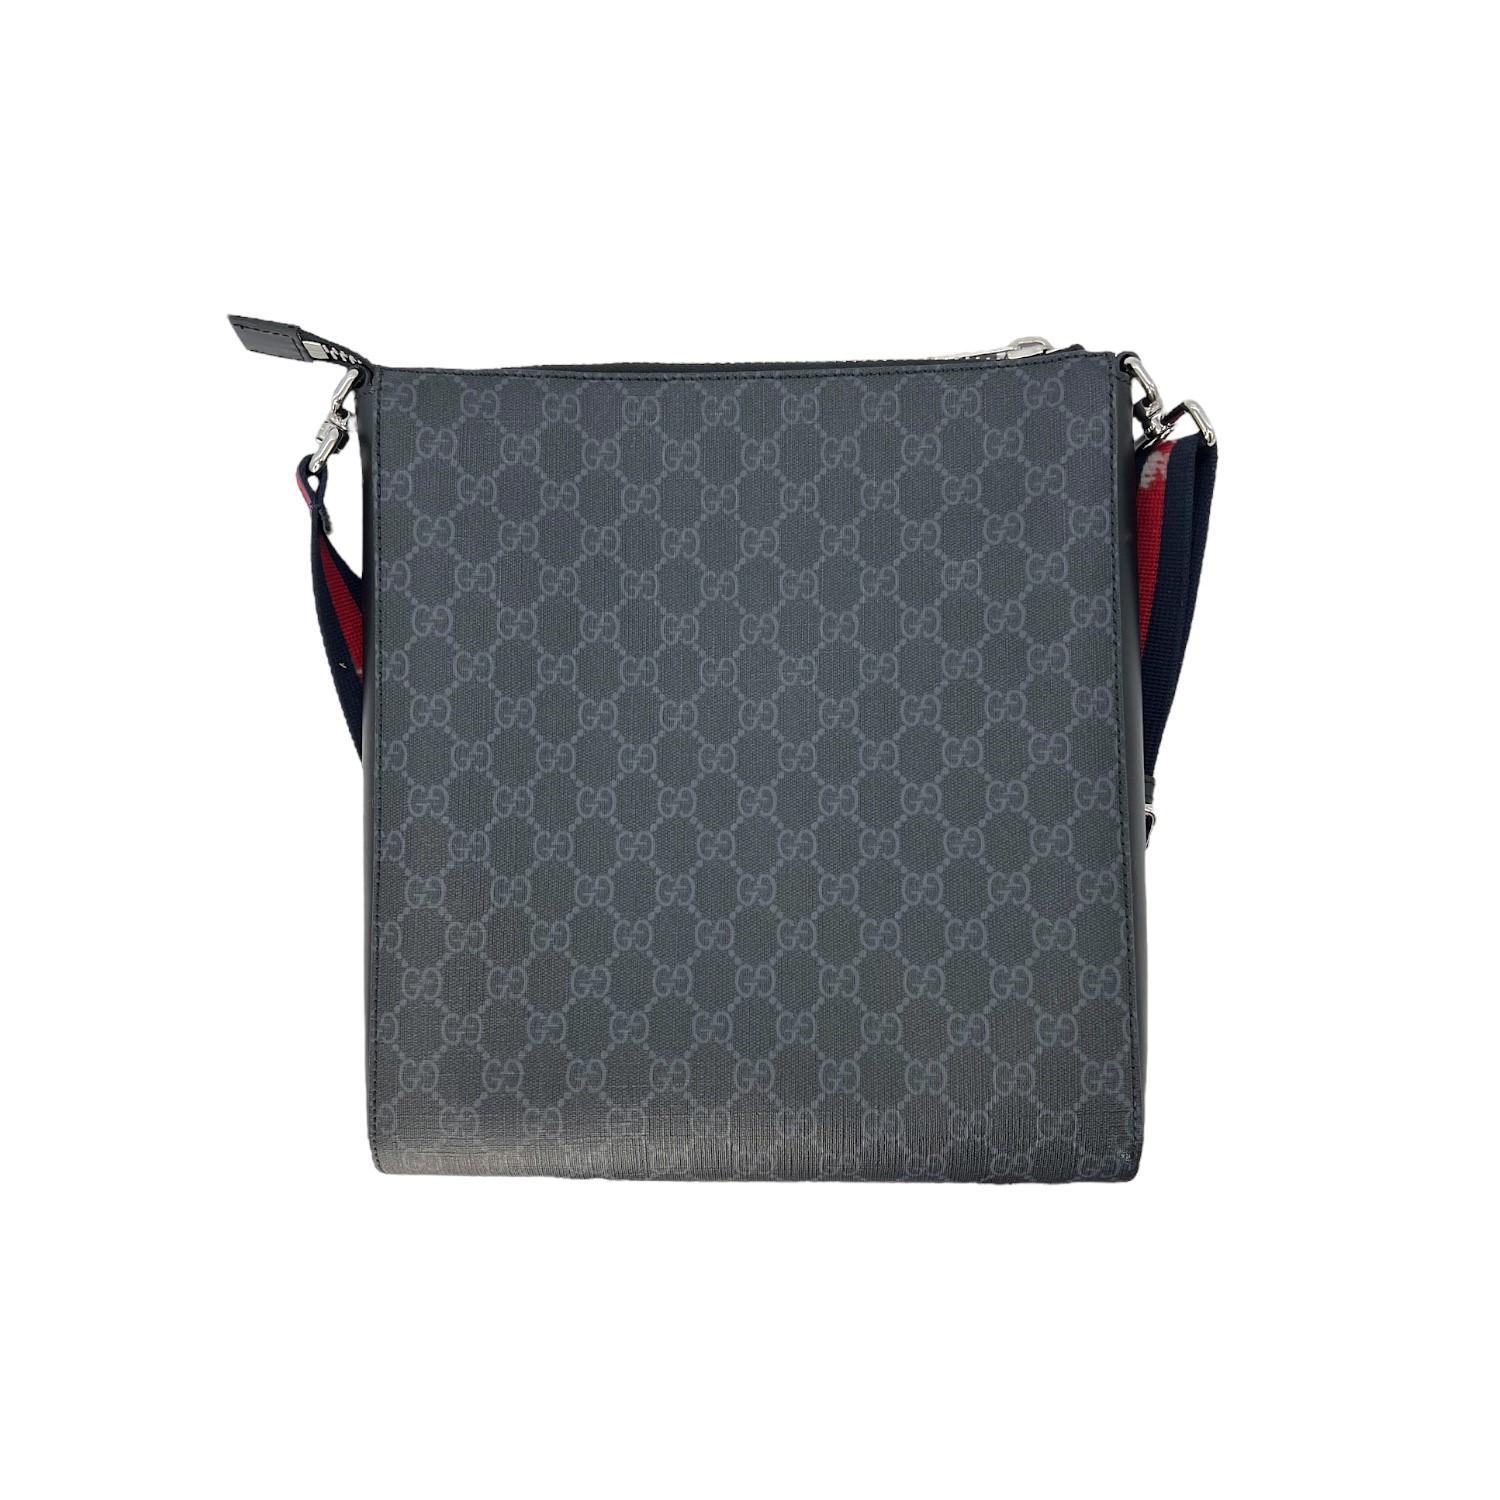 This Gucci GG Supreme Flat Messenger was made in Italy and it is finely crafted of the iconic Gucci GG Supreme coated canvas with leather trimming and Palladium-tone hardware features. It has a frontal zipper pocket. It has an adjustable flat